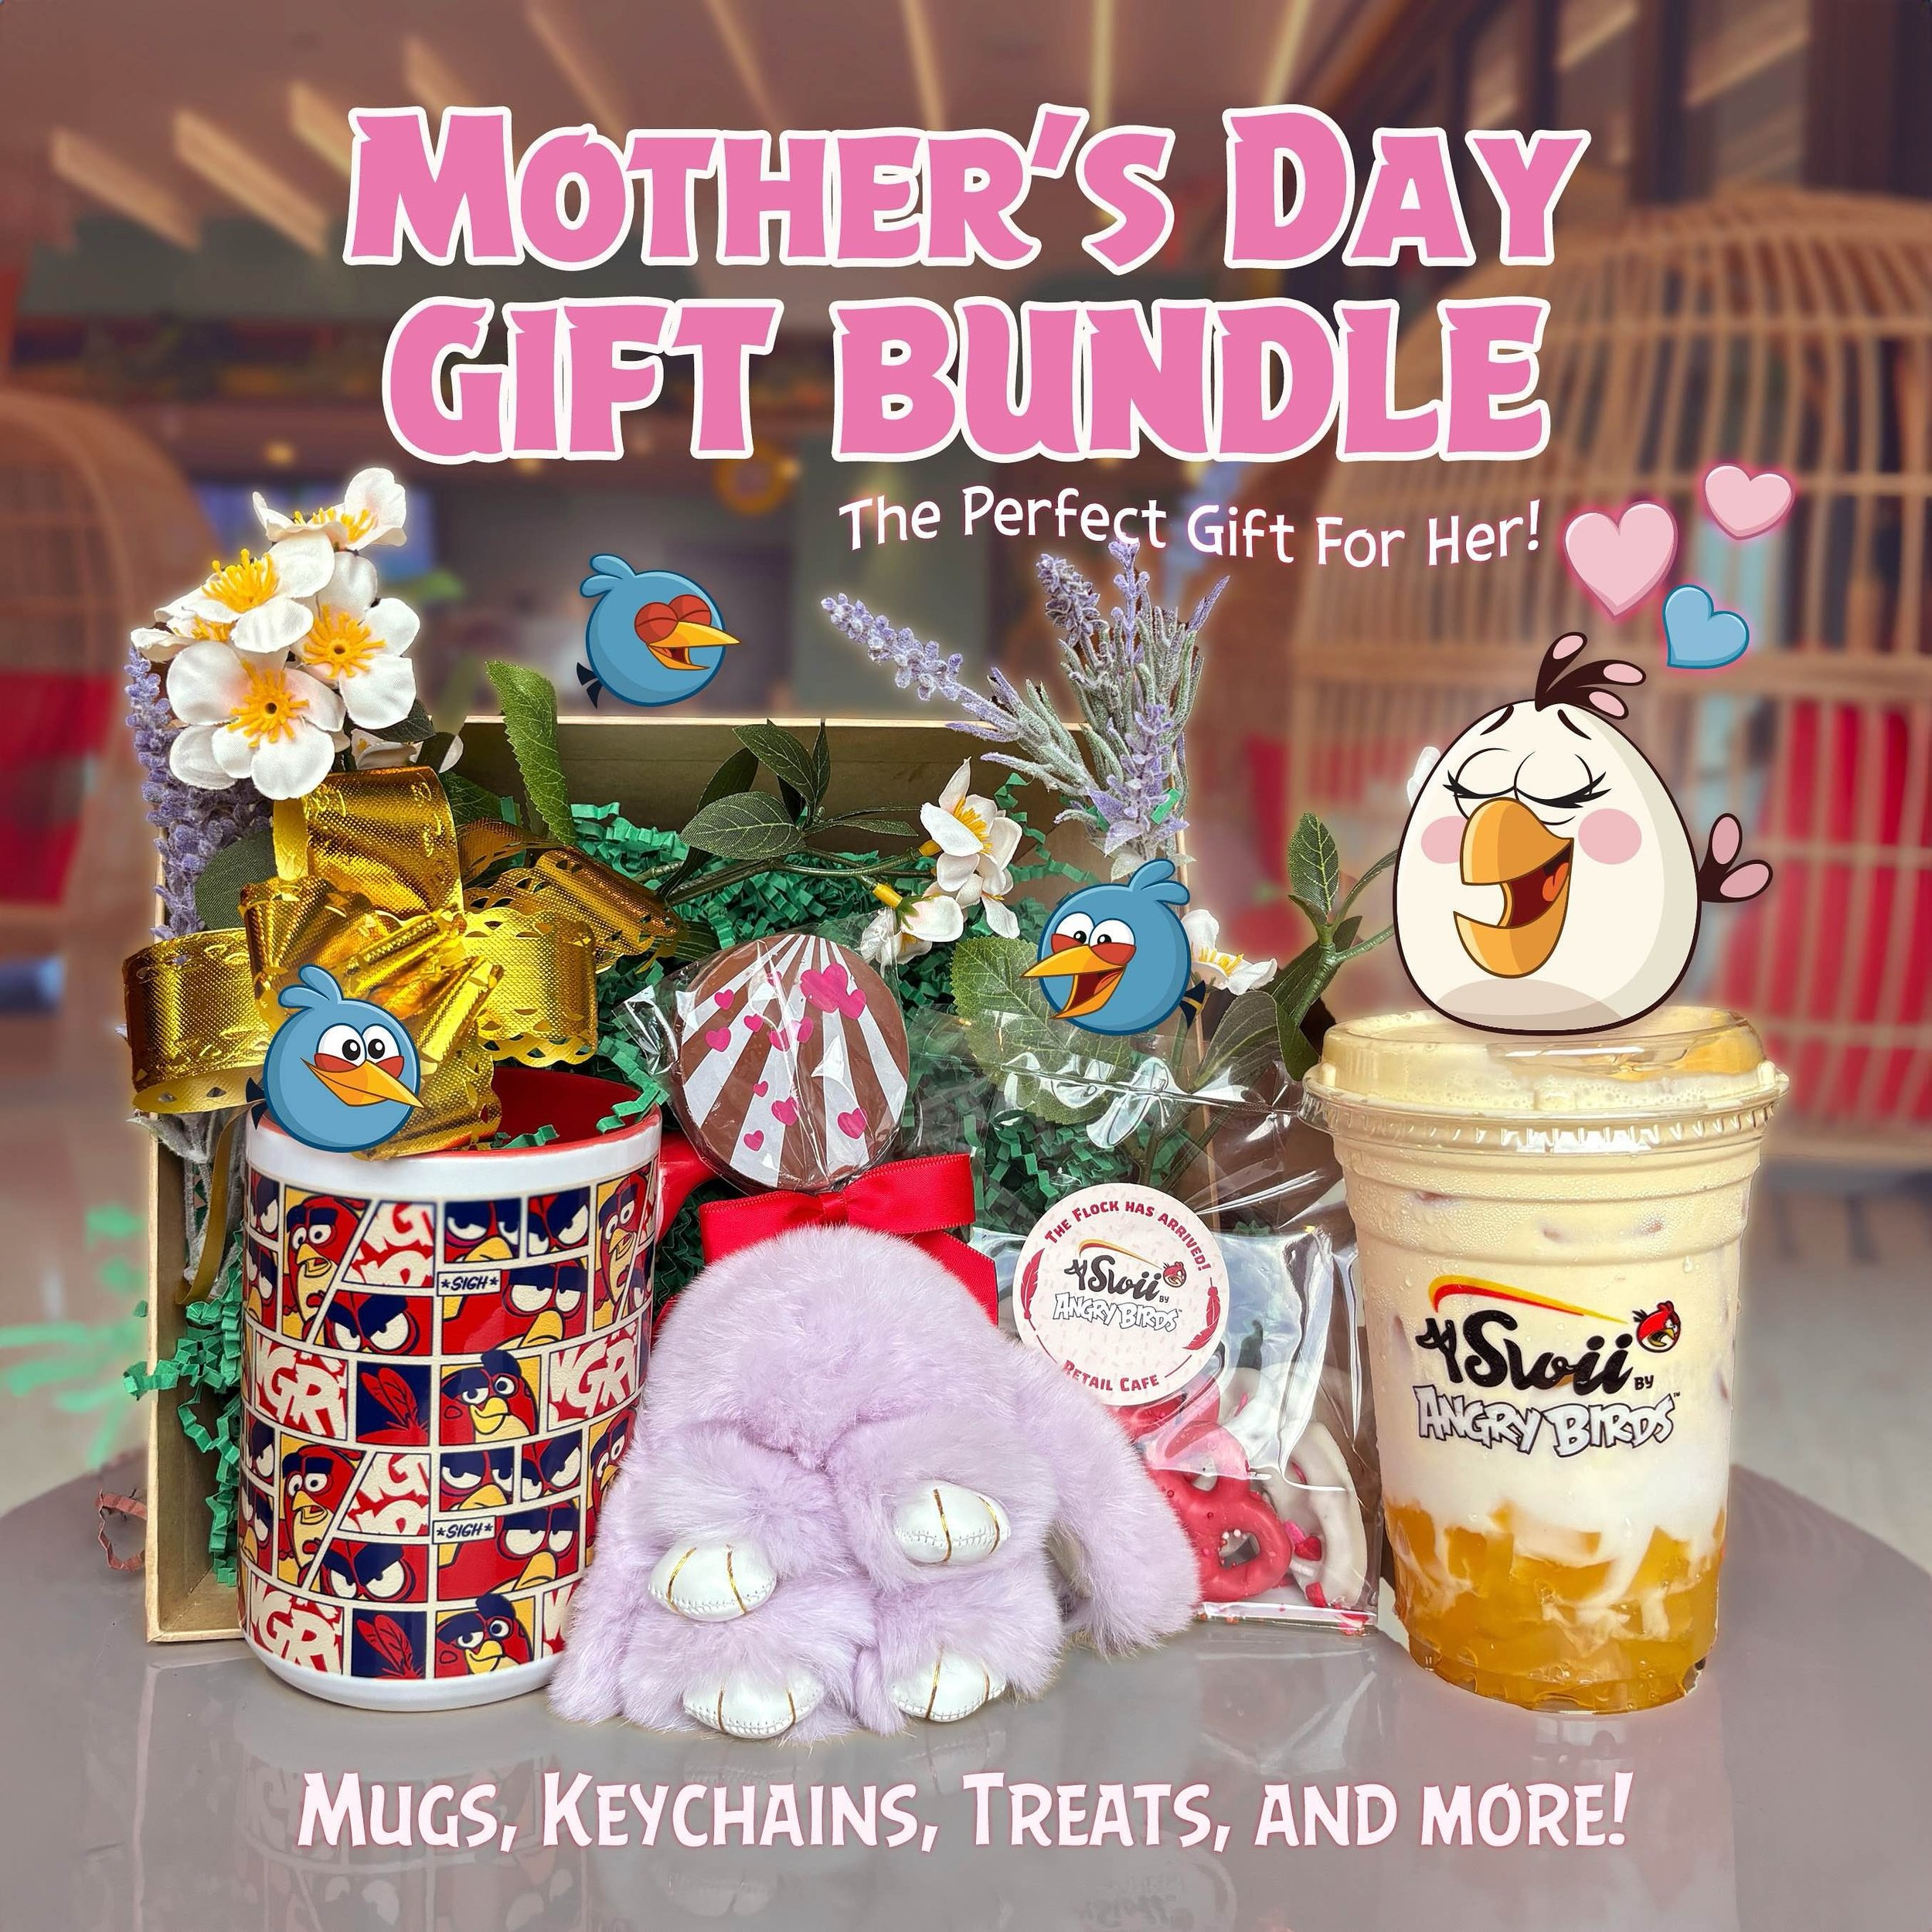 Still looking for the perfect Mother's Day gift? 💝

Our $25 gift bundle includes 1 Angry Birds mug, 1 fluffy bunny keychain, 1 chocolate lollipop, 1 bag of chocolate-covered pretzels, and 1 coupon for any 16oz drink of your choice! 🤤🫶 

Cuteness a